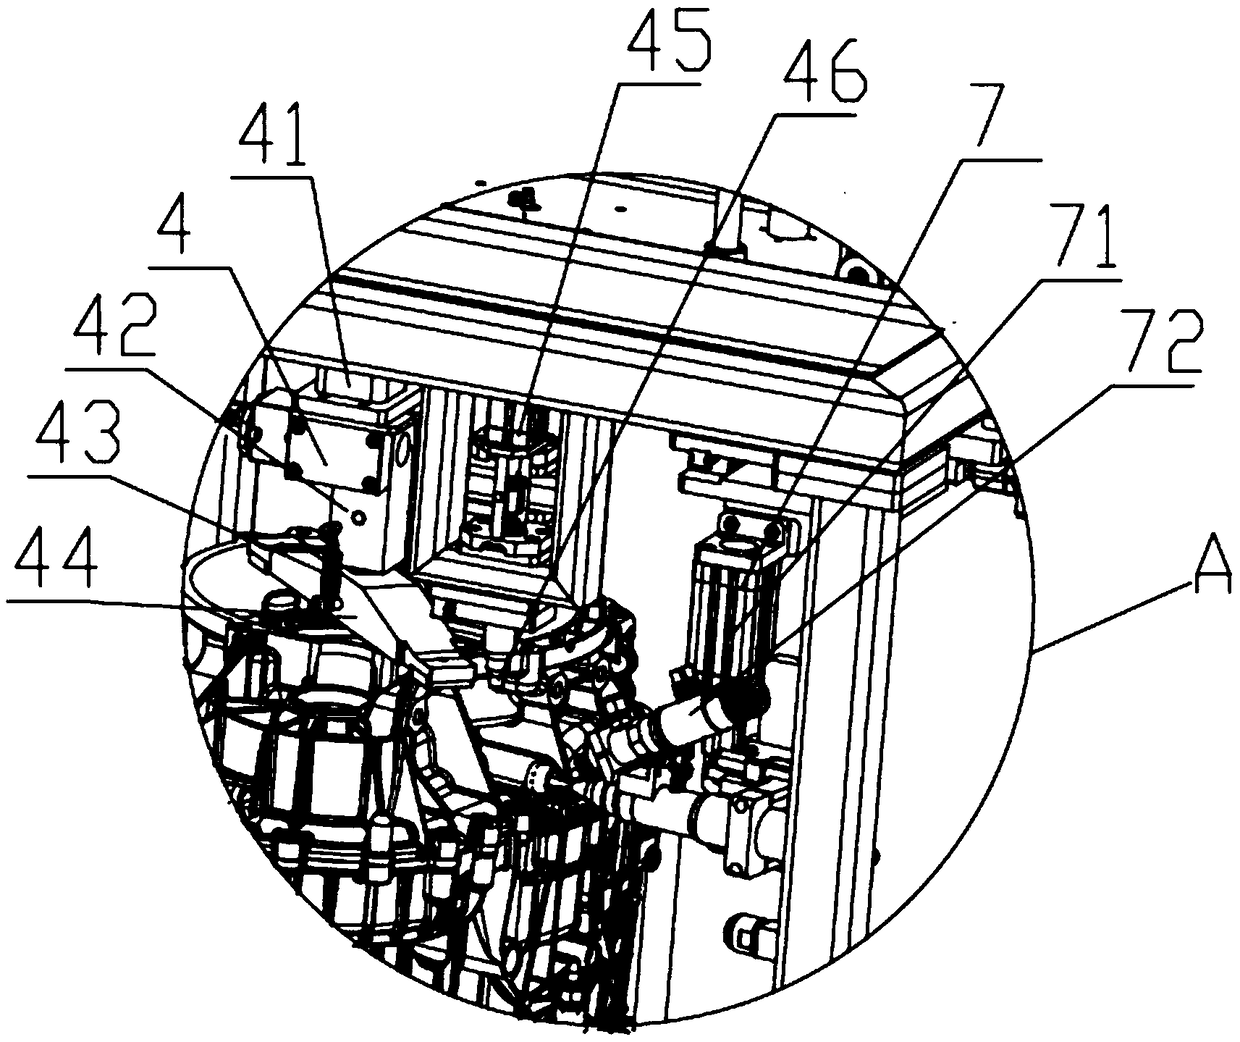 Mounting device for gearbox gear shifting assembly